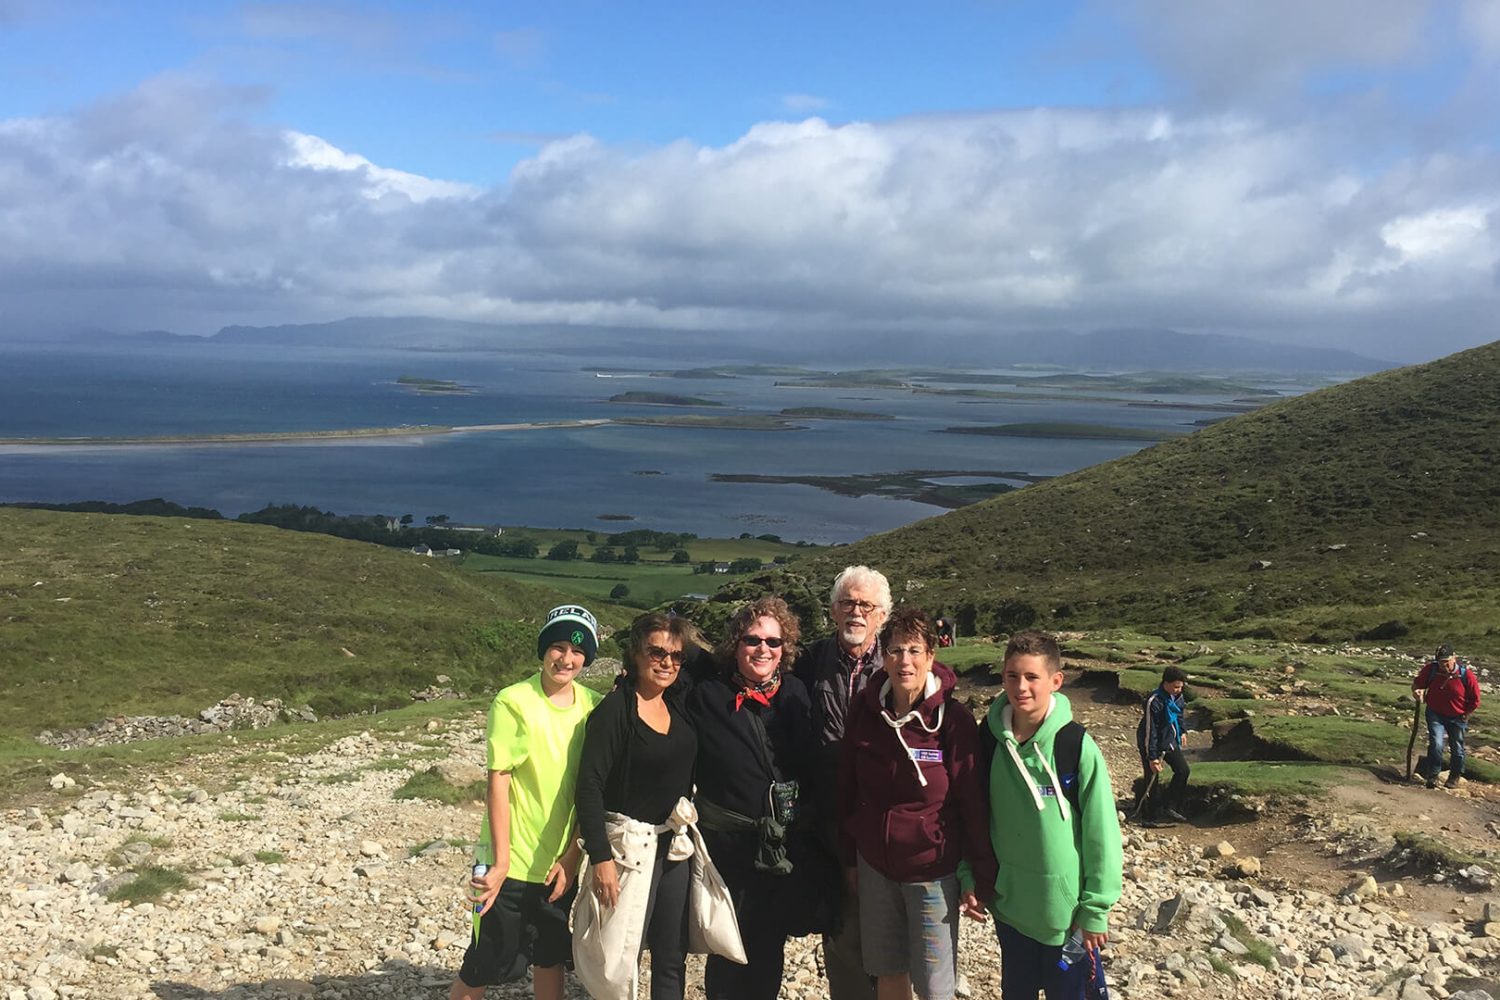 Group of hikers posing for a photo with a scenic bay and rolling hills in the background of Ireland.